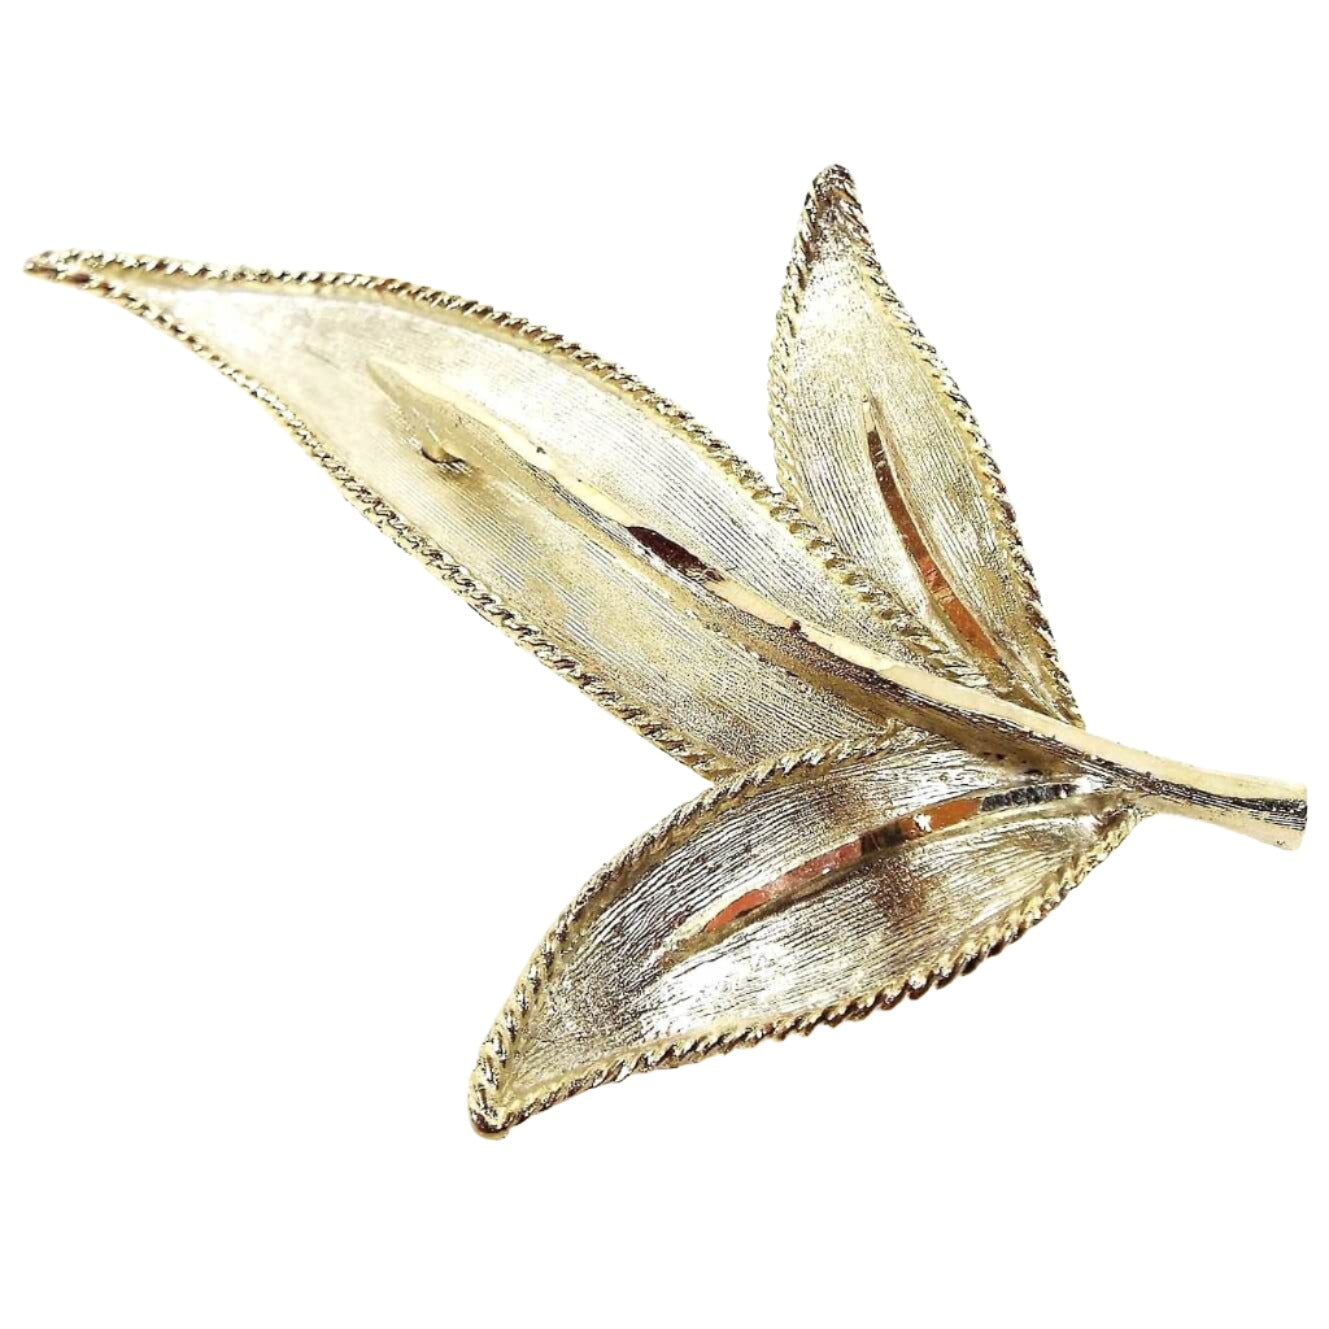 Front view of the retro vintage BSK brooch pin. The metal is textured and a light gold tone in color. It's shaped like a leaf with three leaf areas coming off the stem.